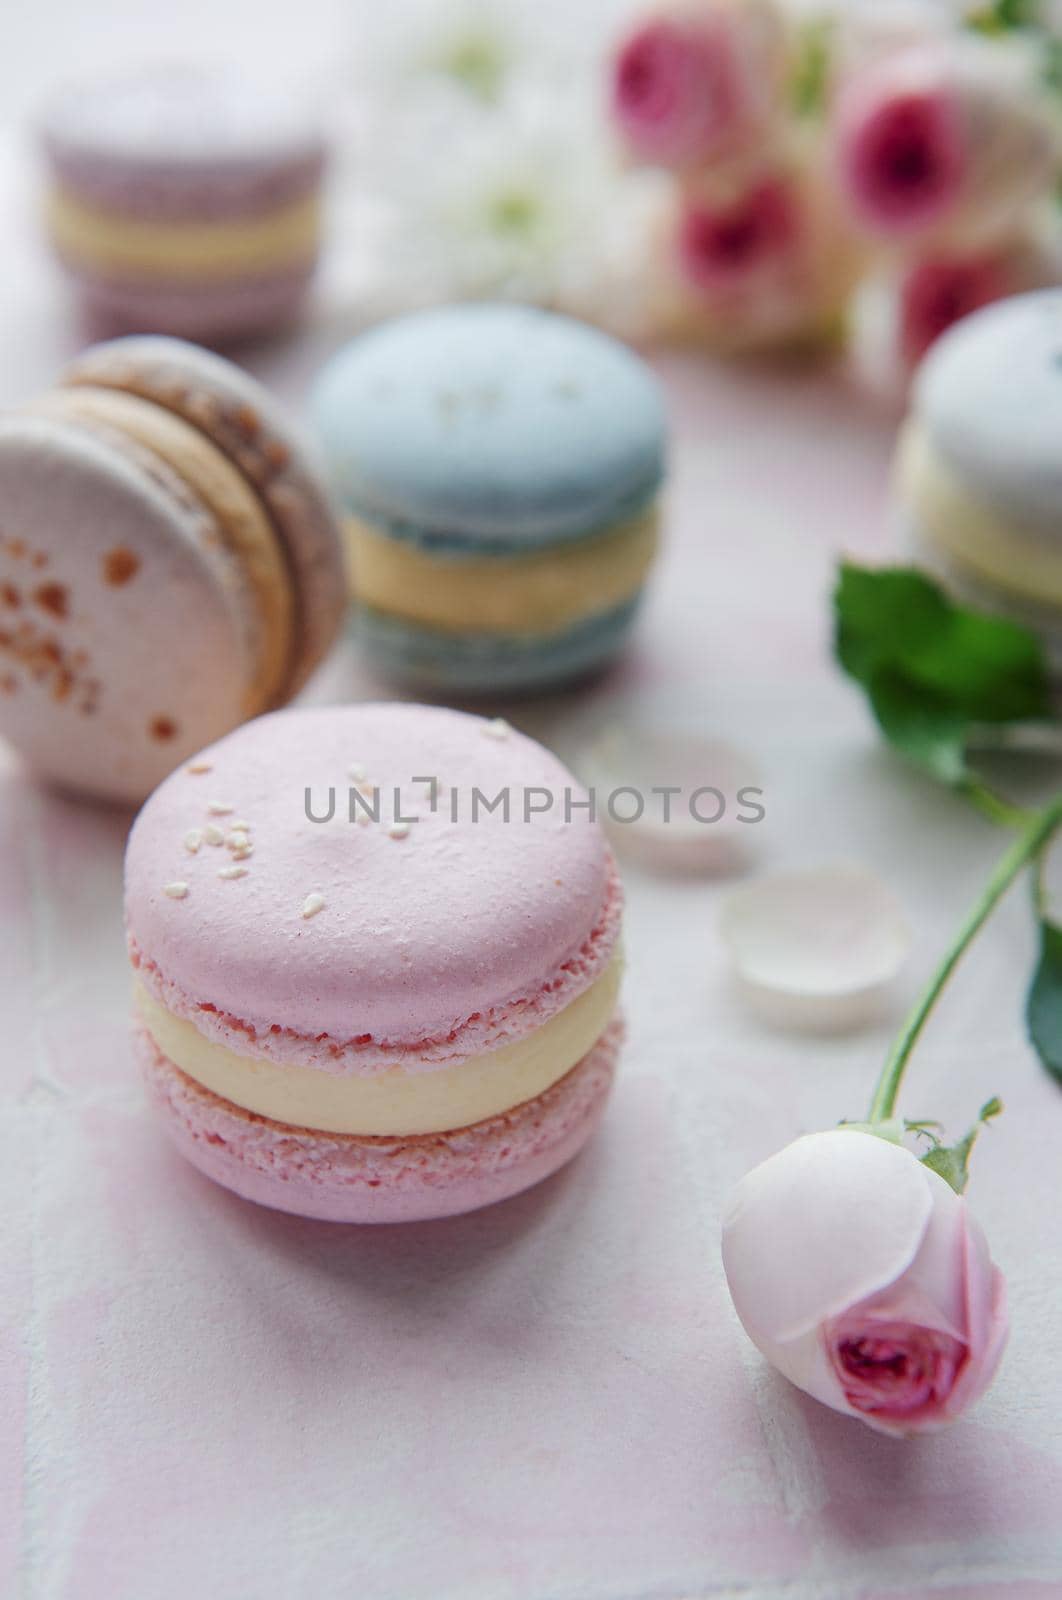 Beautiful colorful tasty macaroons and pink roses on a pink tile background